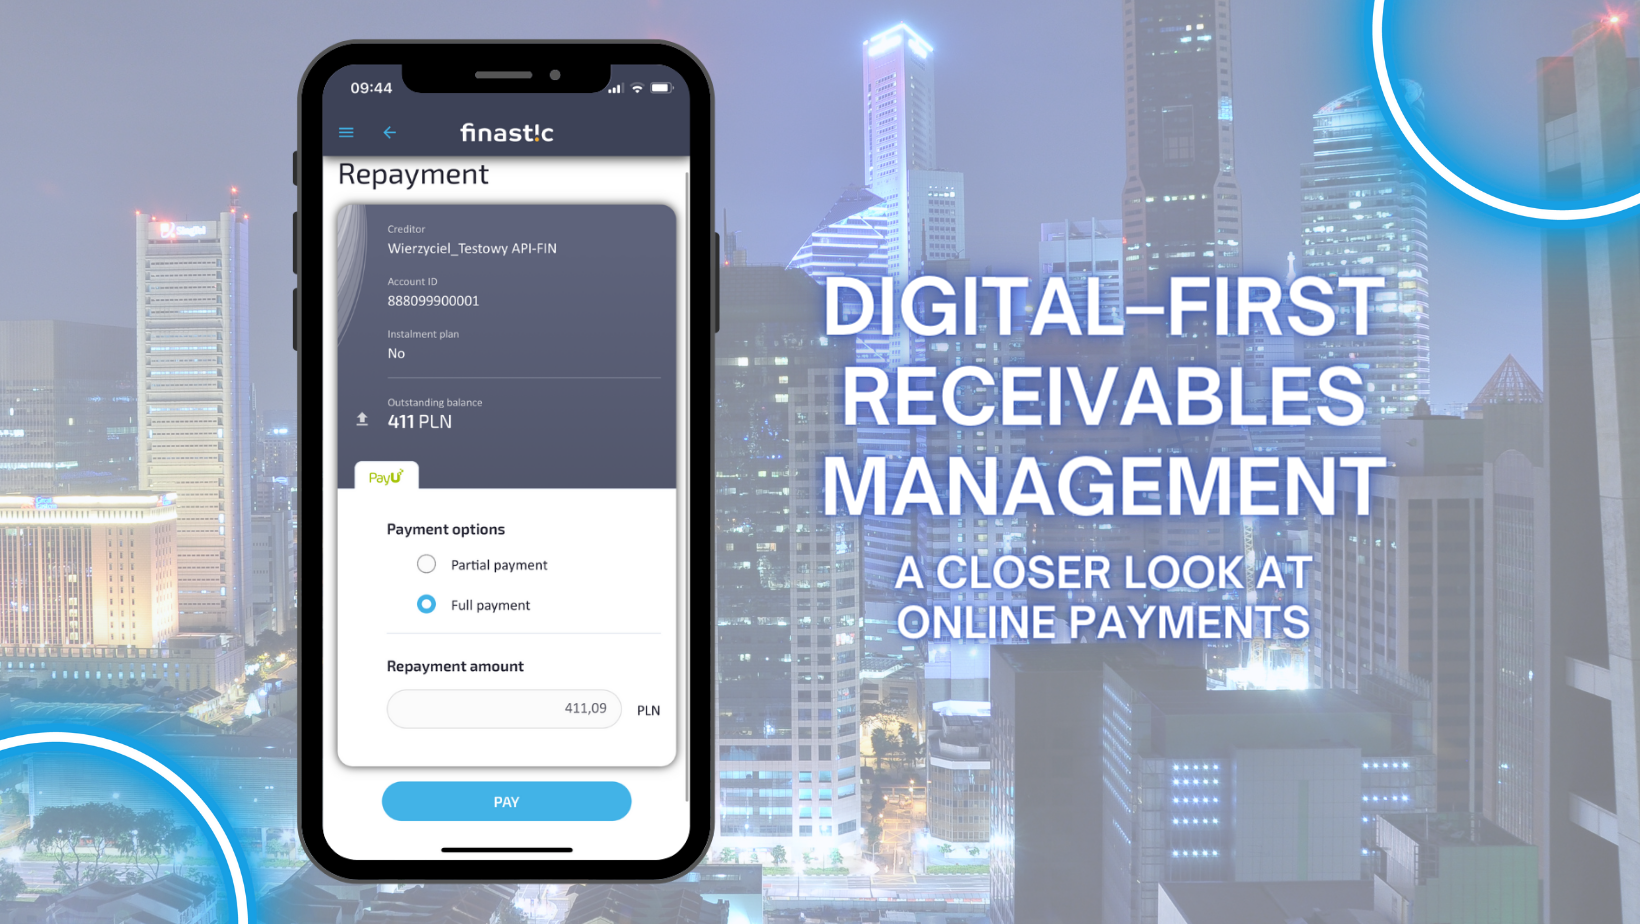 Digital-first receivables management: closer look at online payments